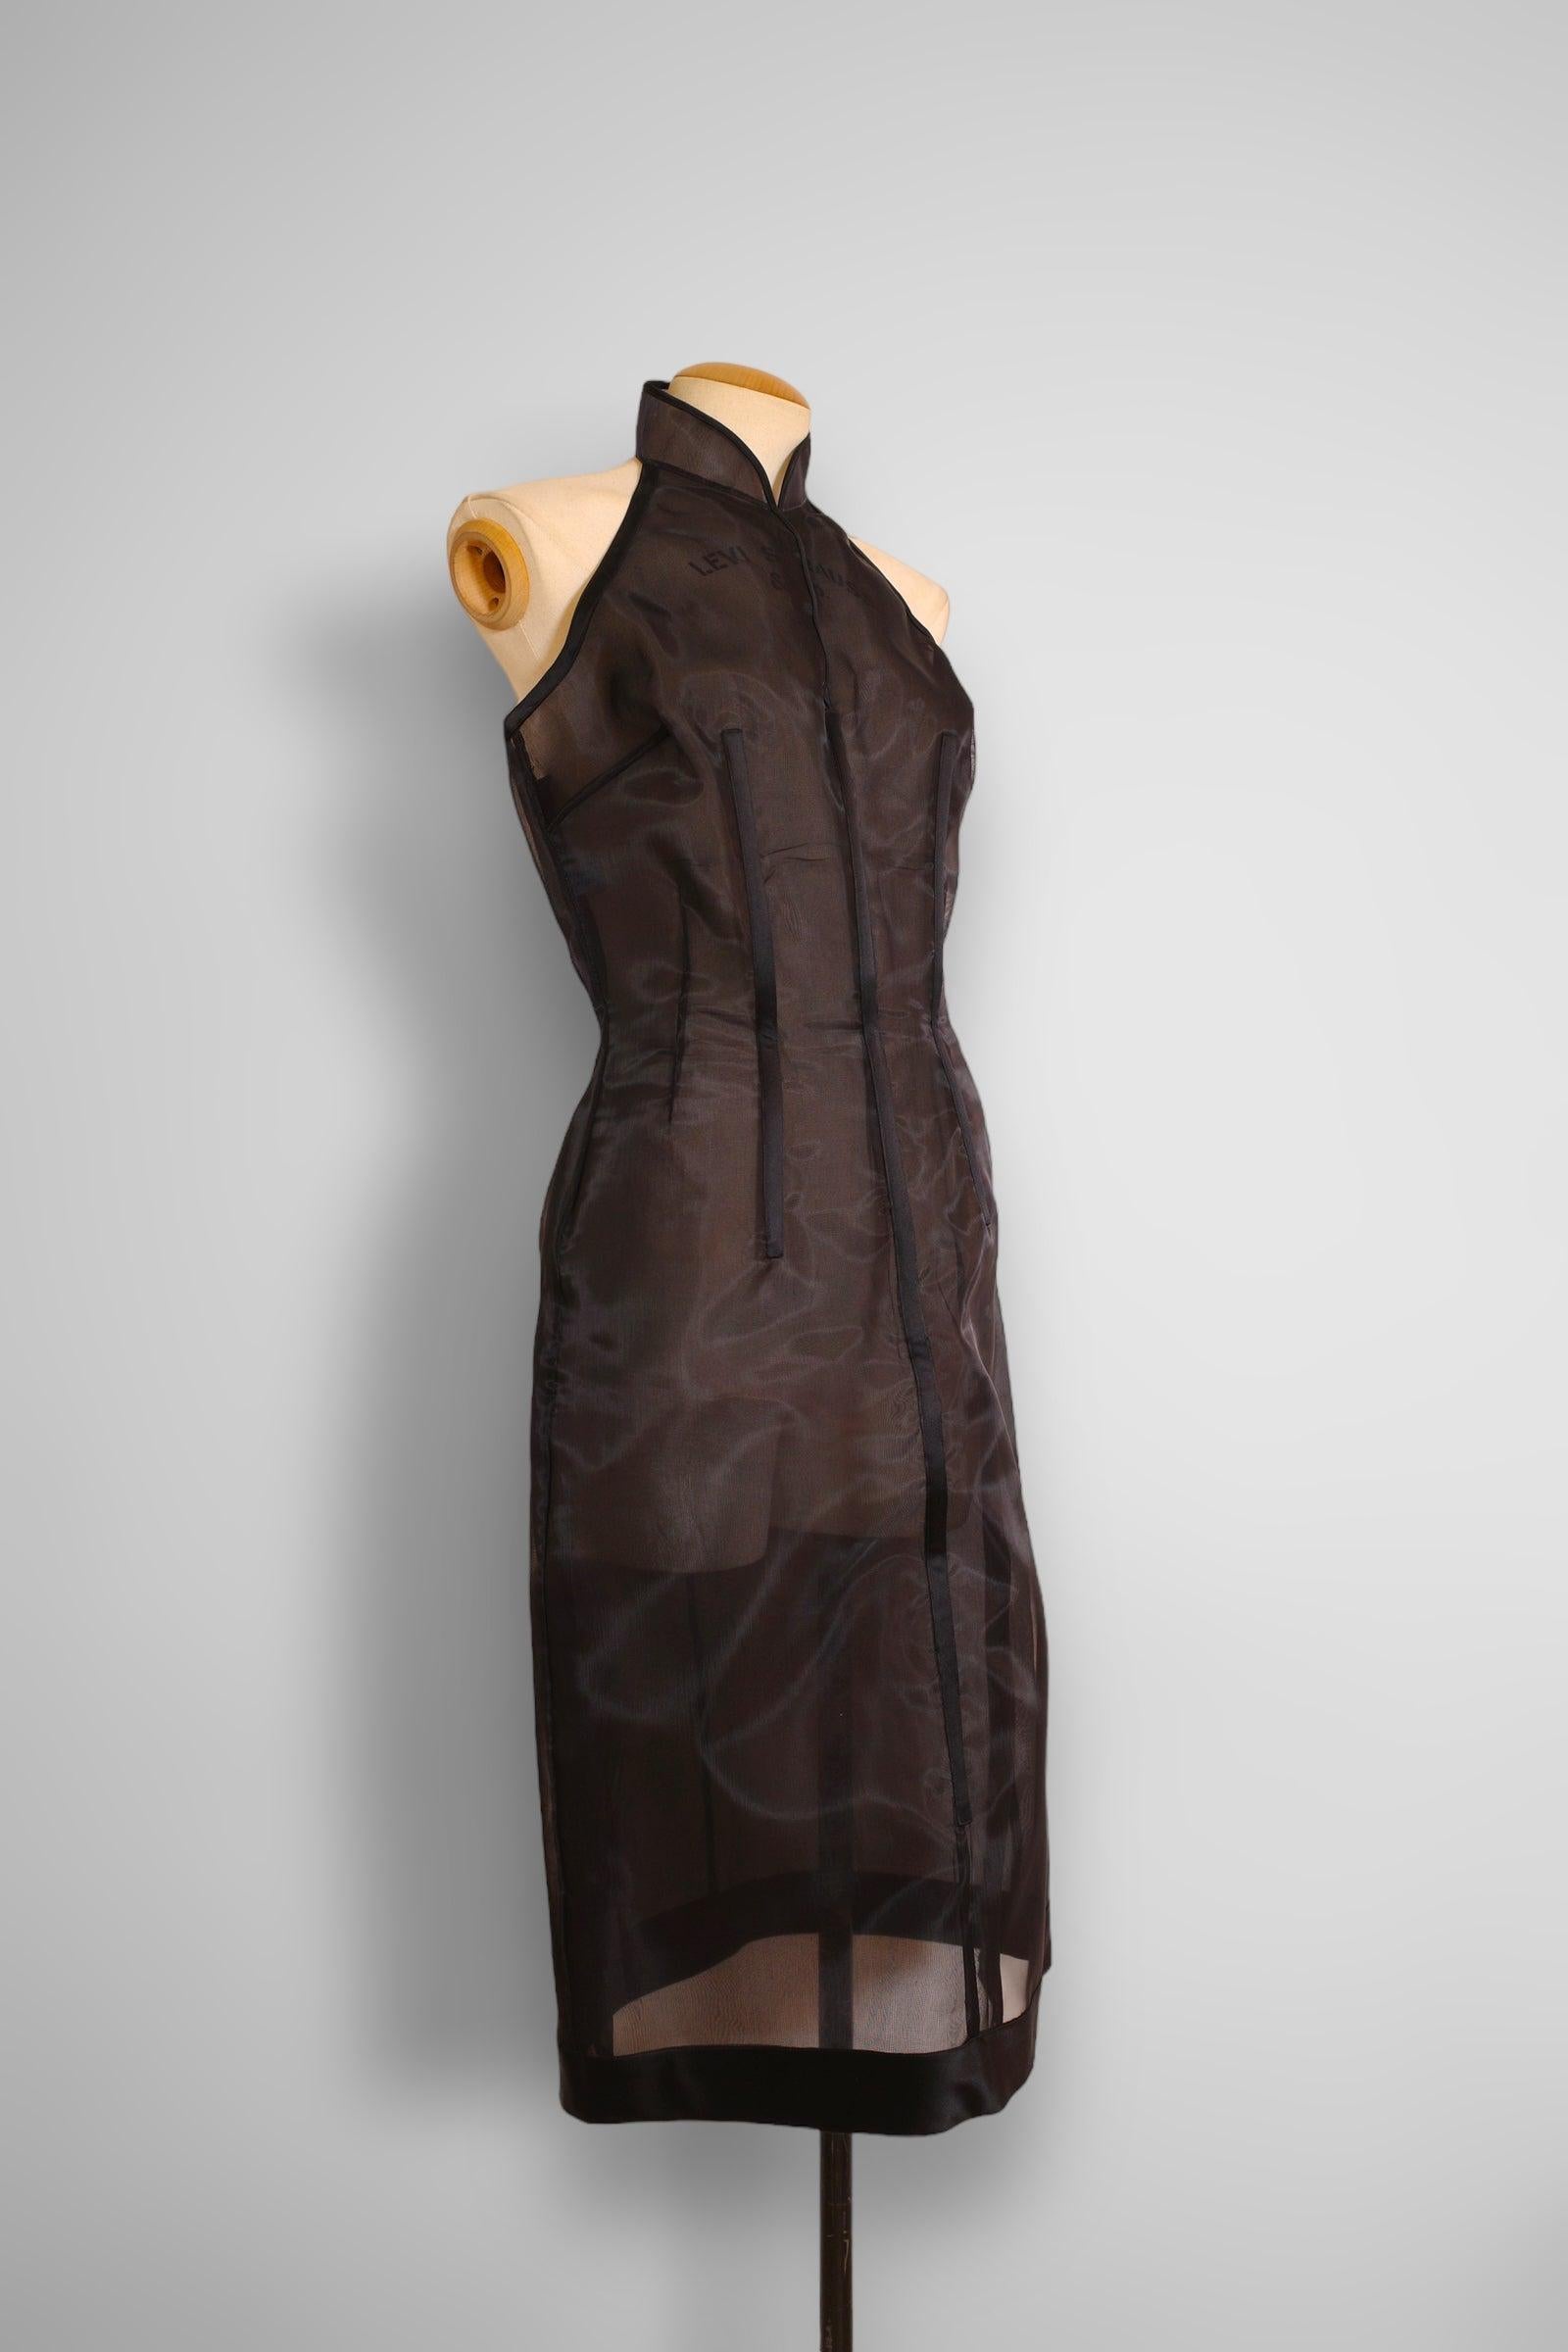 Vintage Prada 1995 runway collection sheer halter dress. The dress is made of nylon and completely boned all around. 

Size 44, (L)

Condition: 8/10, very good preloved condition, back bones are slightly poking through but minimal. Bones are a bend